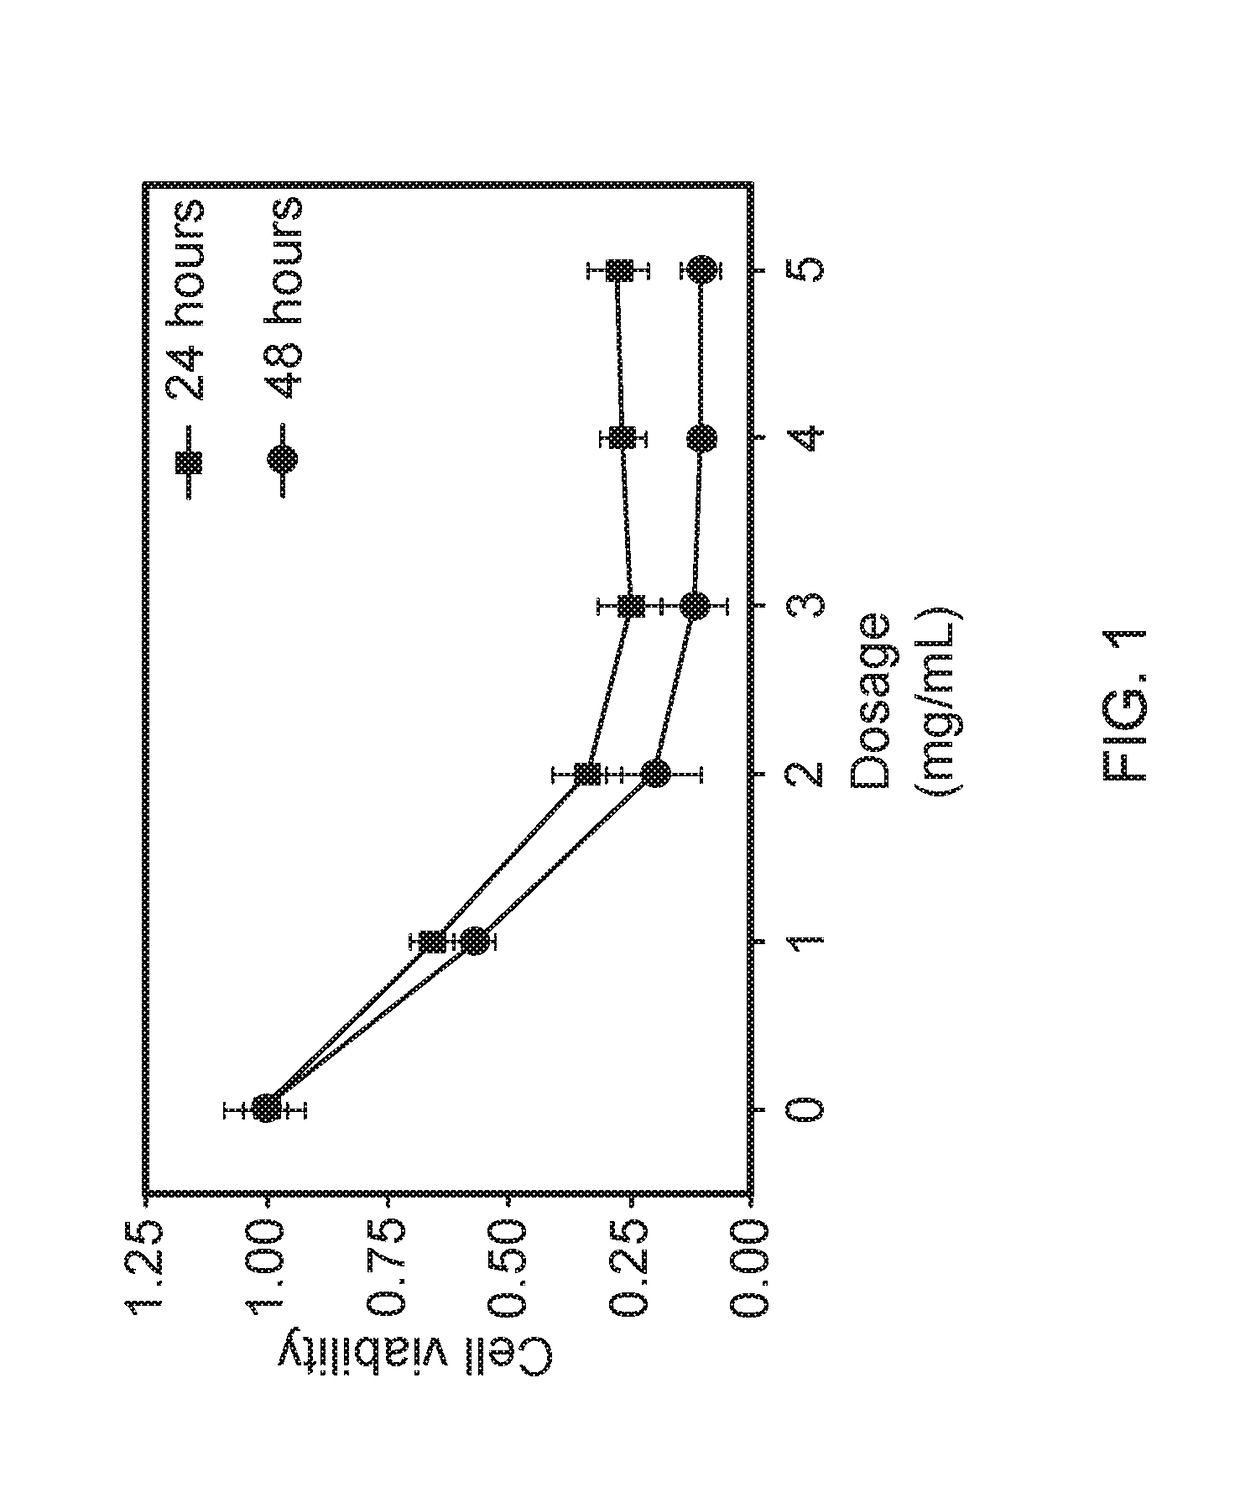 Composition for inhibiting renal cancer cell growth and enhancing kidney function